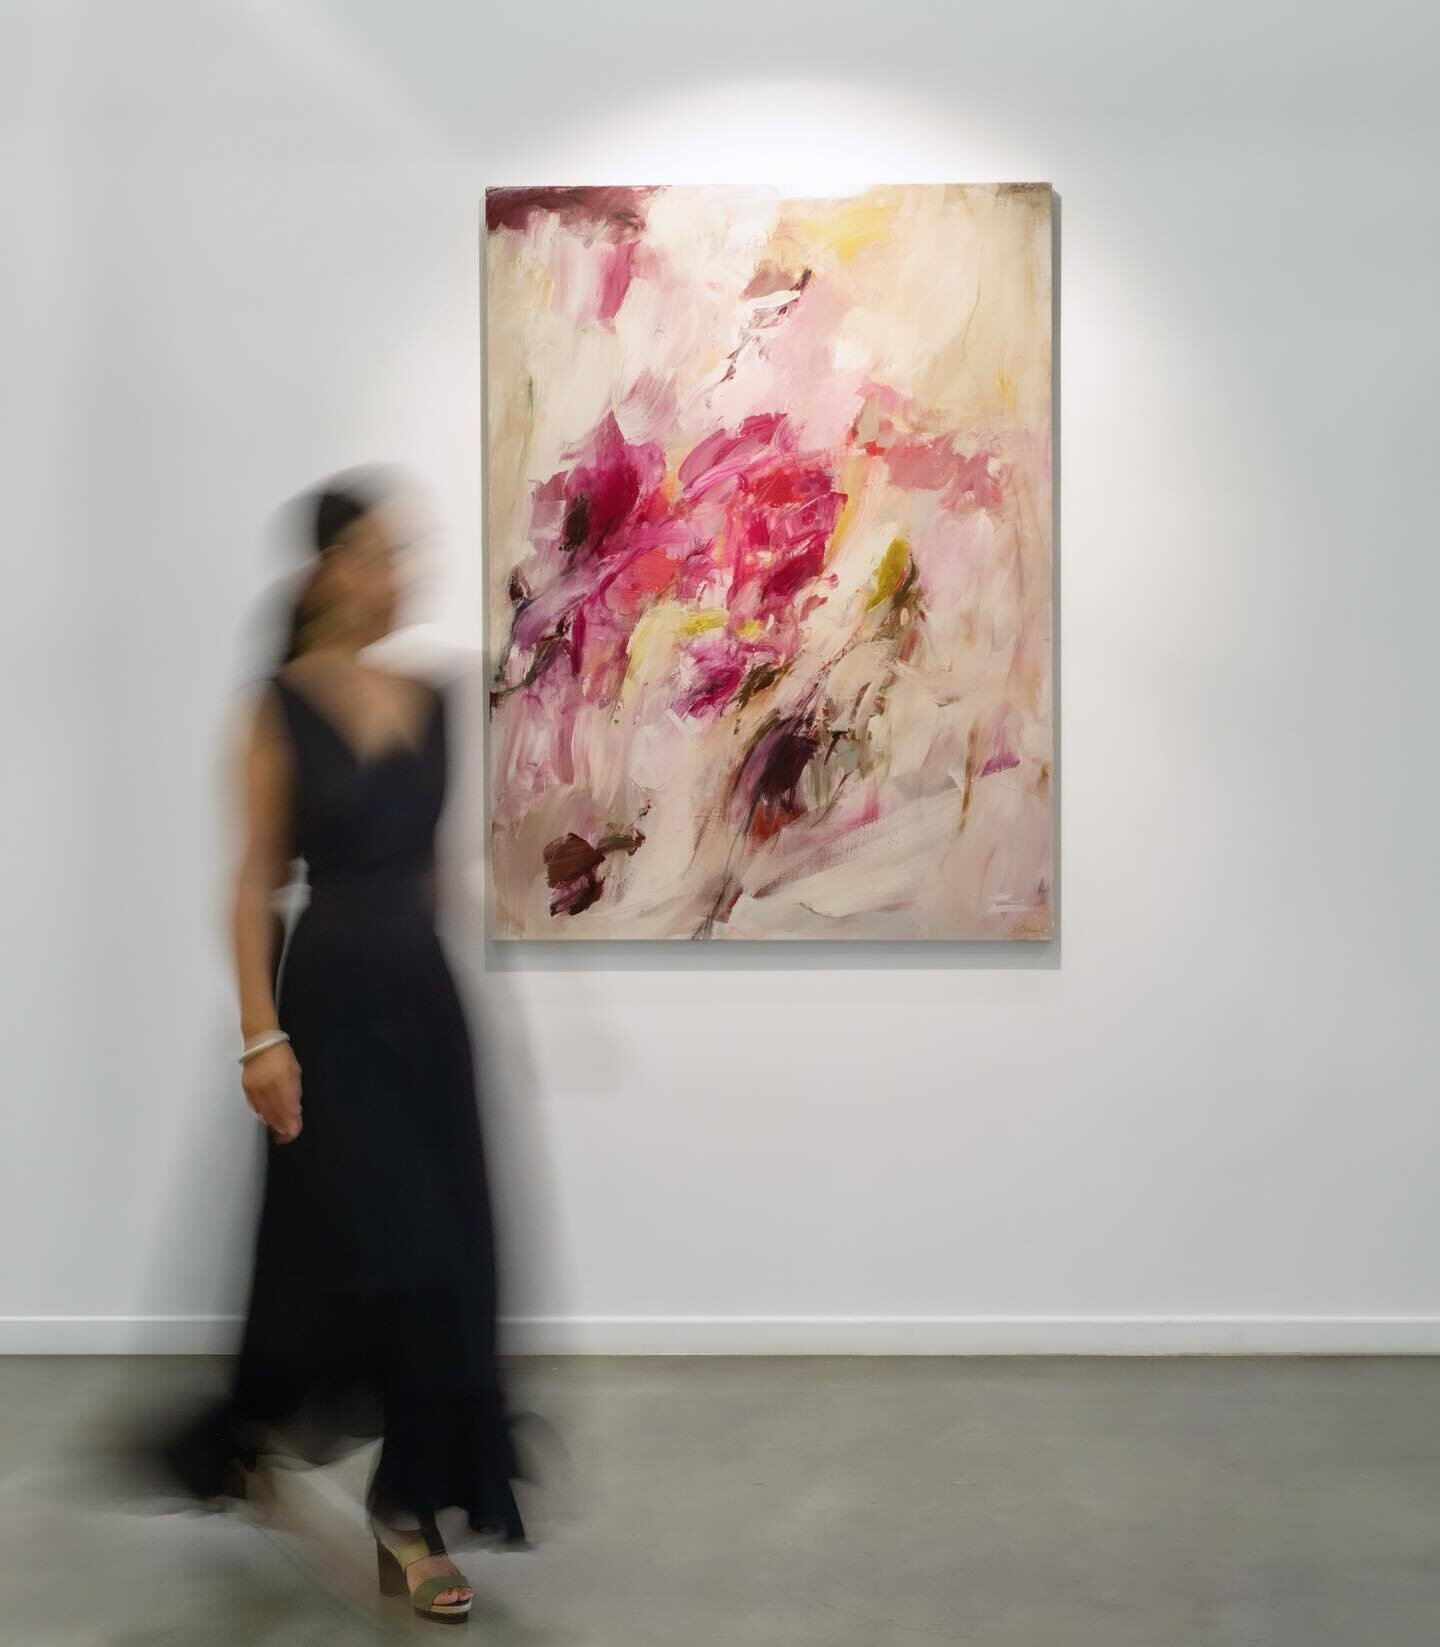 Art SG opened its door today! 

Public Viewing:
January 19-21

Venue:
Marina Bay Sands

Exhibited by:
A Lighthouse Called Kanata
Booth BE11

[PEONY]
Acrylic, aquarelle pastel, cold wax on canvas
H150xW112

#ArtSG
#artfair
#singapore
#abstractart
#con